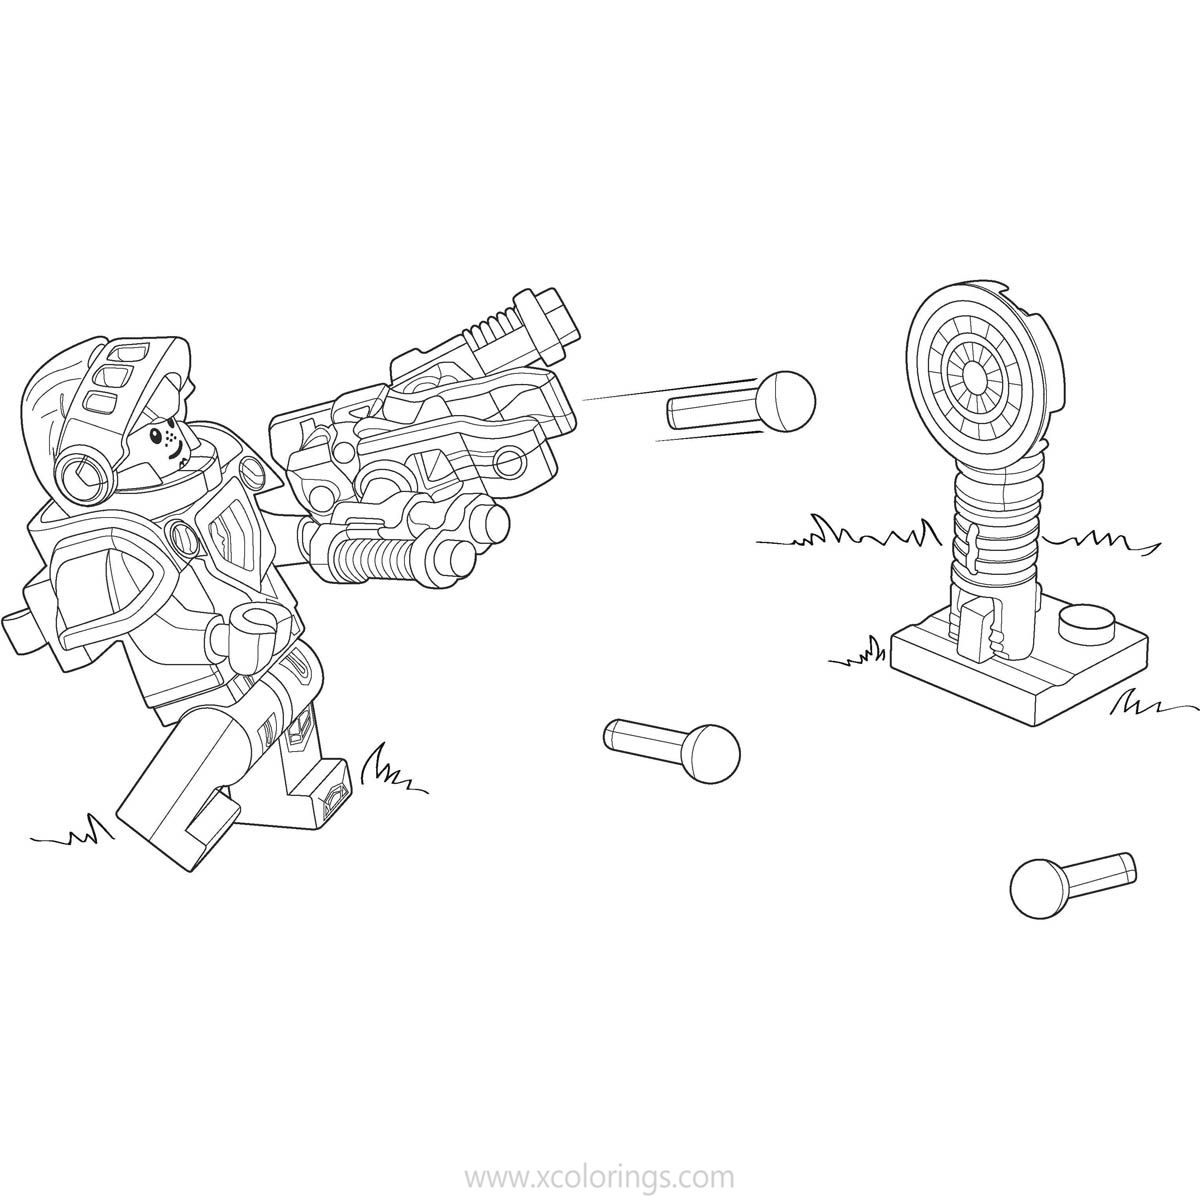 Free LEGO NEXO Knights Coloring Pages Shooting the Target printable